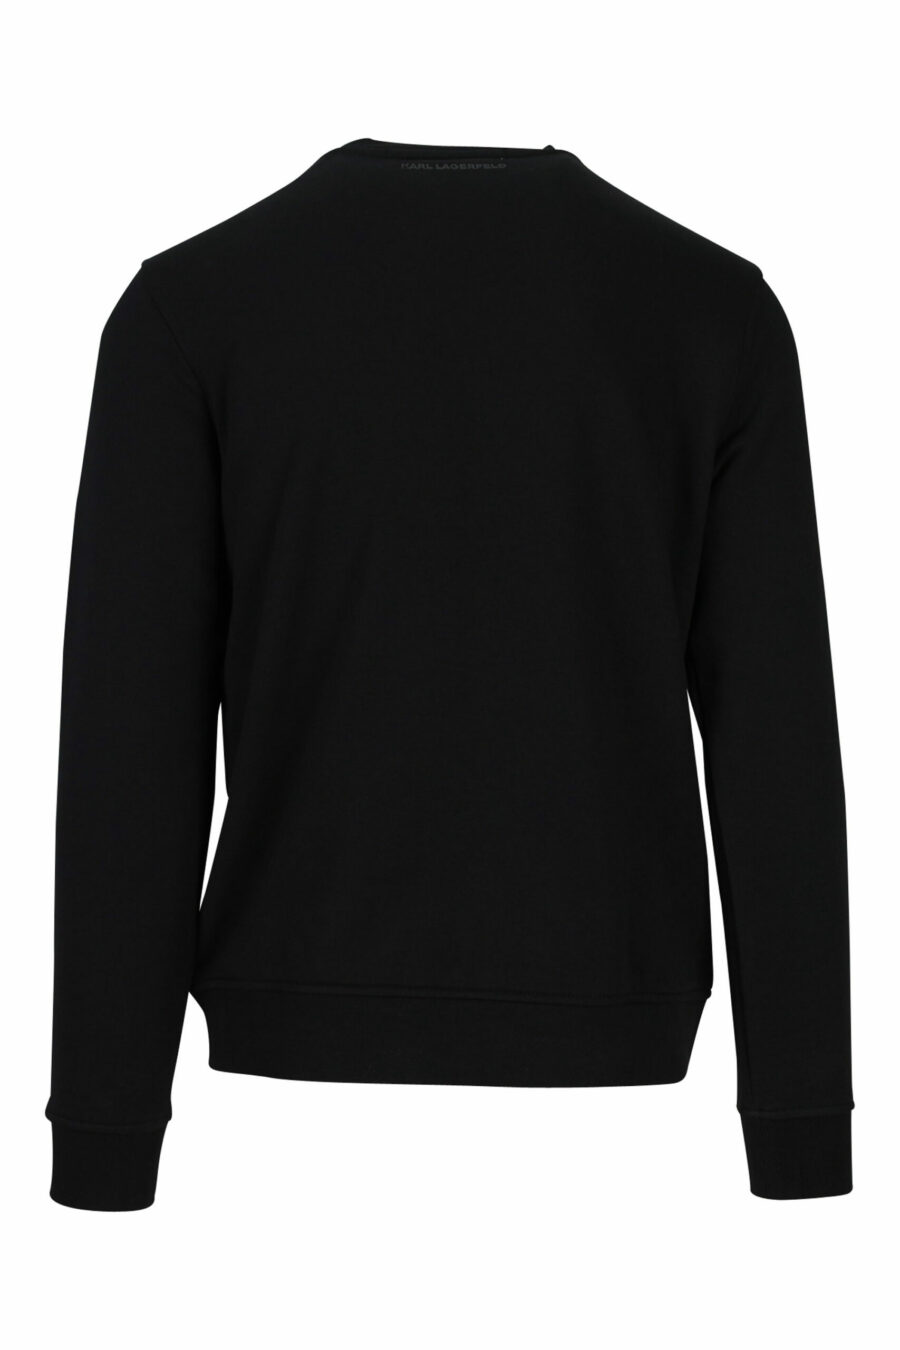 Black sweatshirt with maxilogo "karl" silhouette in gold - 4062226658409 1 scaled